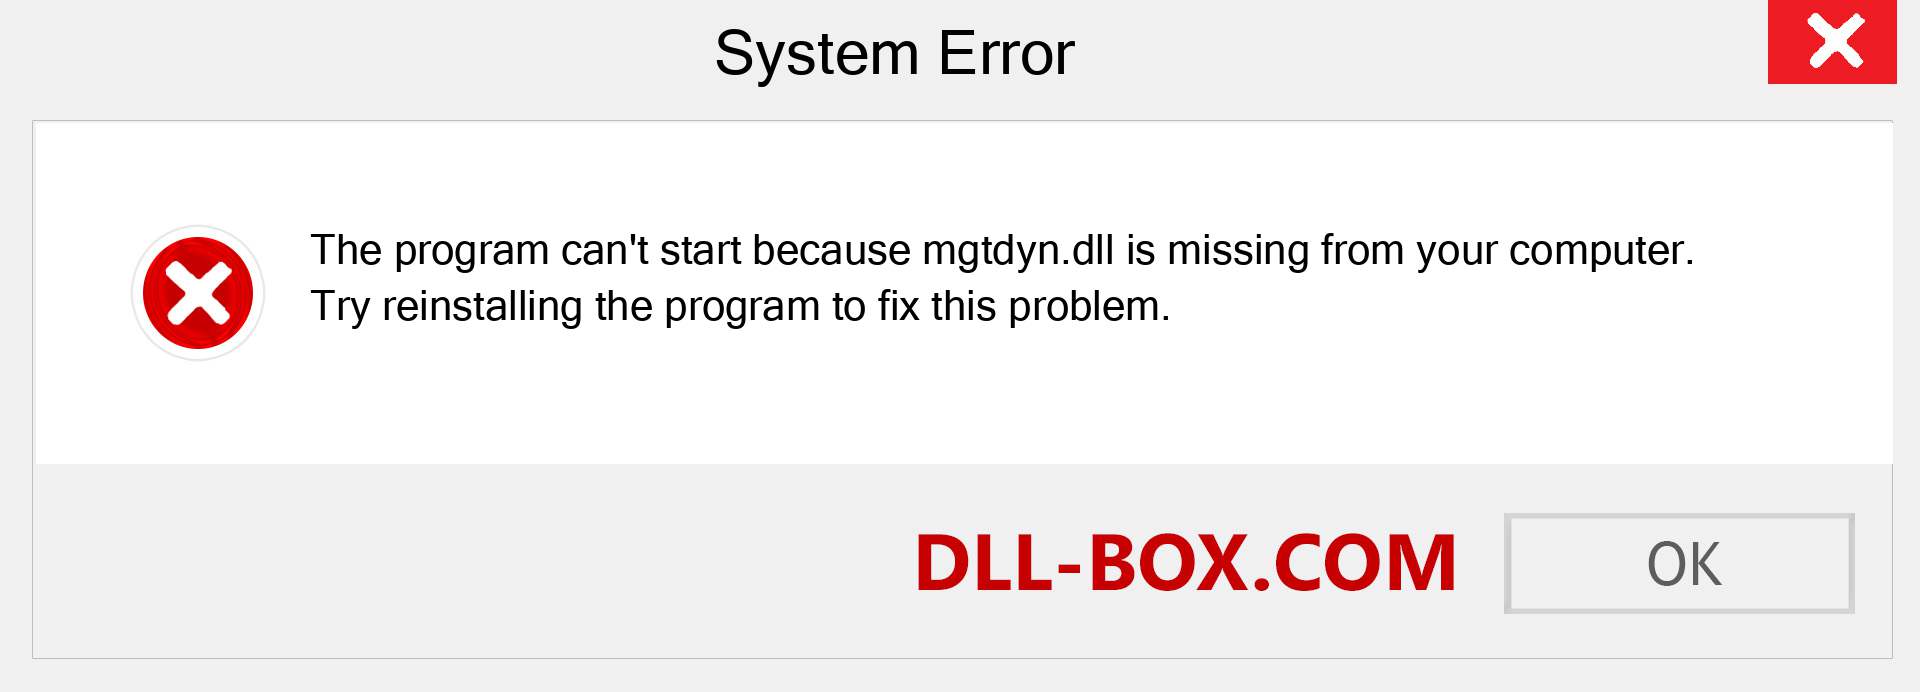  mgtdyn.dll file is missing?. Download for Windows 7, 8, 10 - Fix  mgtdyn dll Missing Error on Windows, photos, images